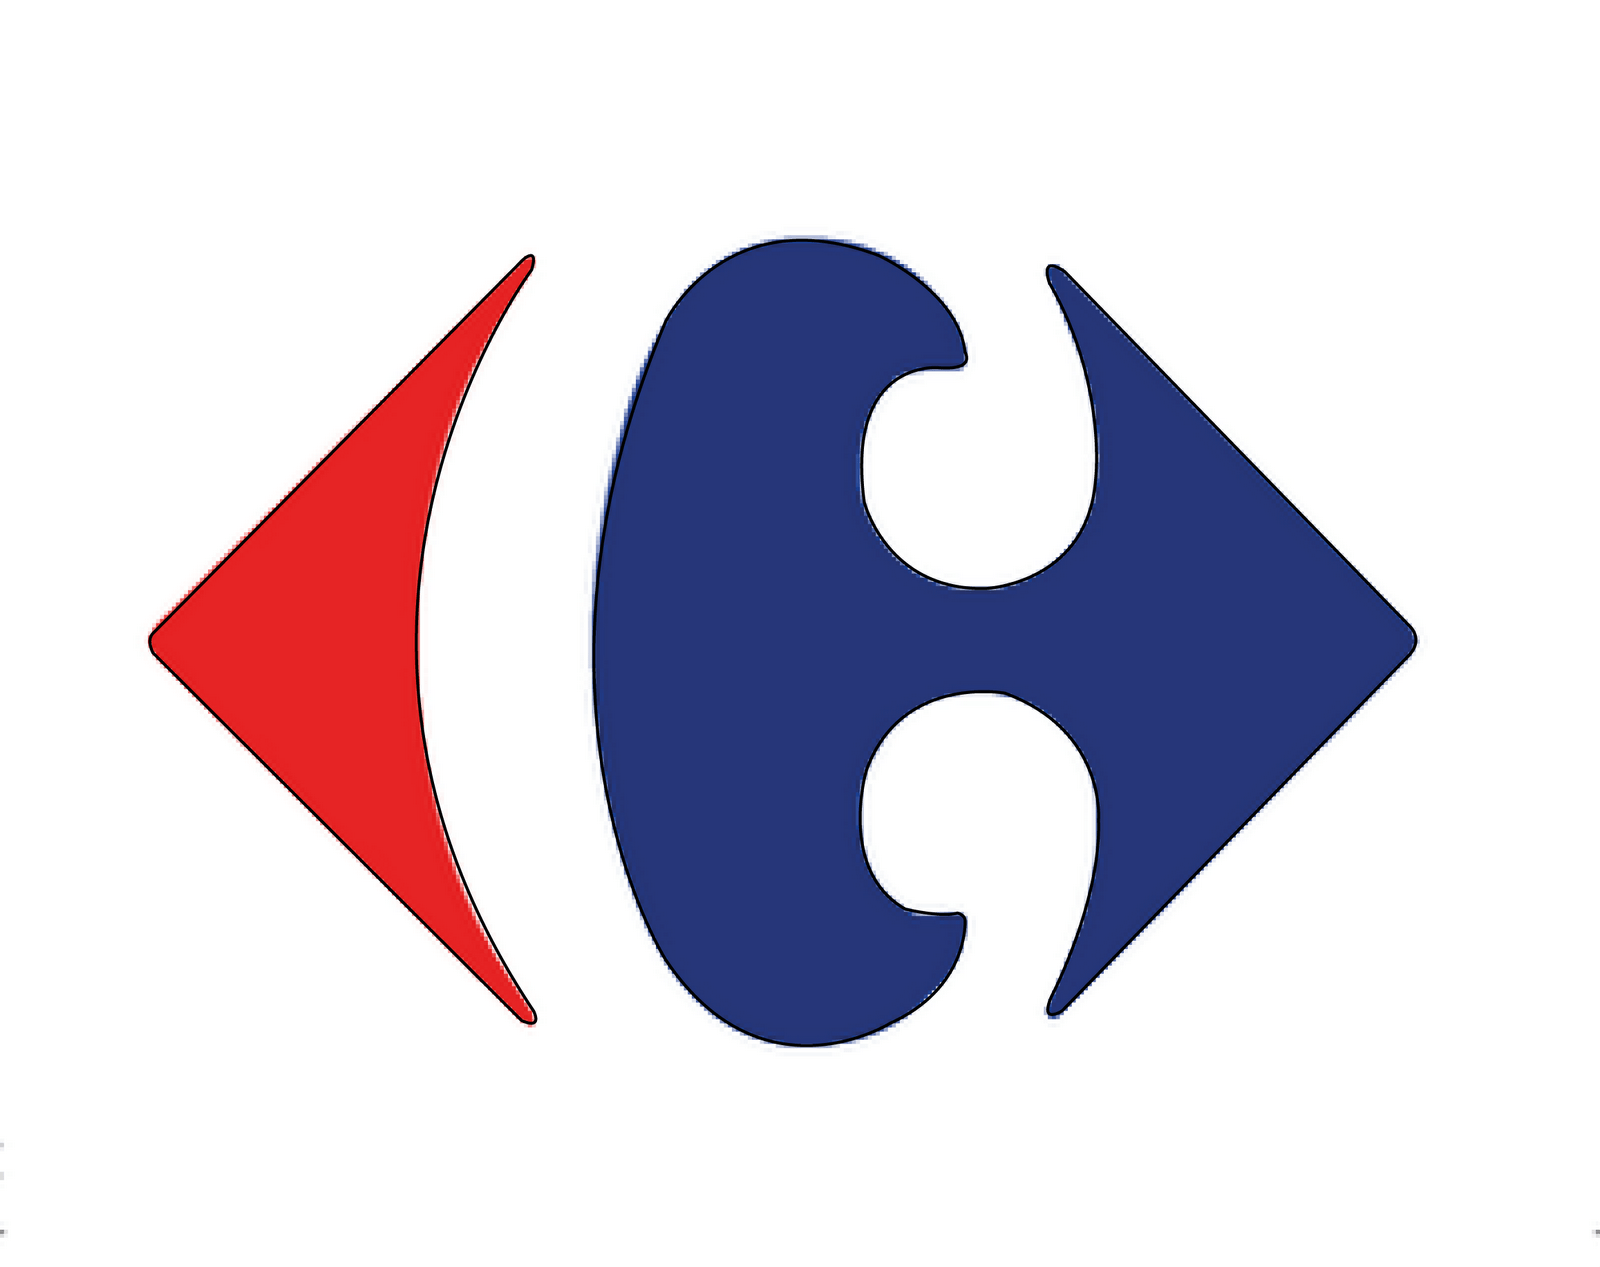 Red and Blue C Logo - Red and blue Logos